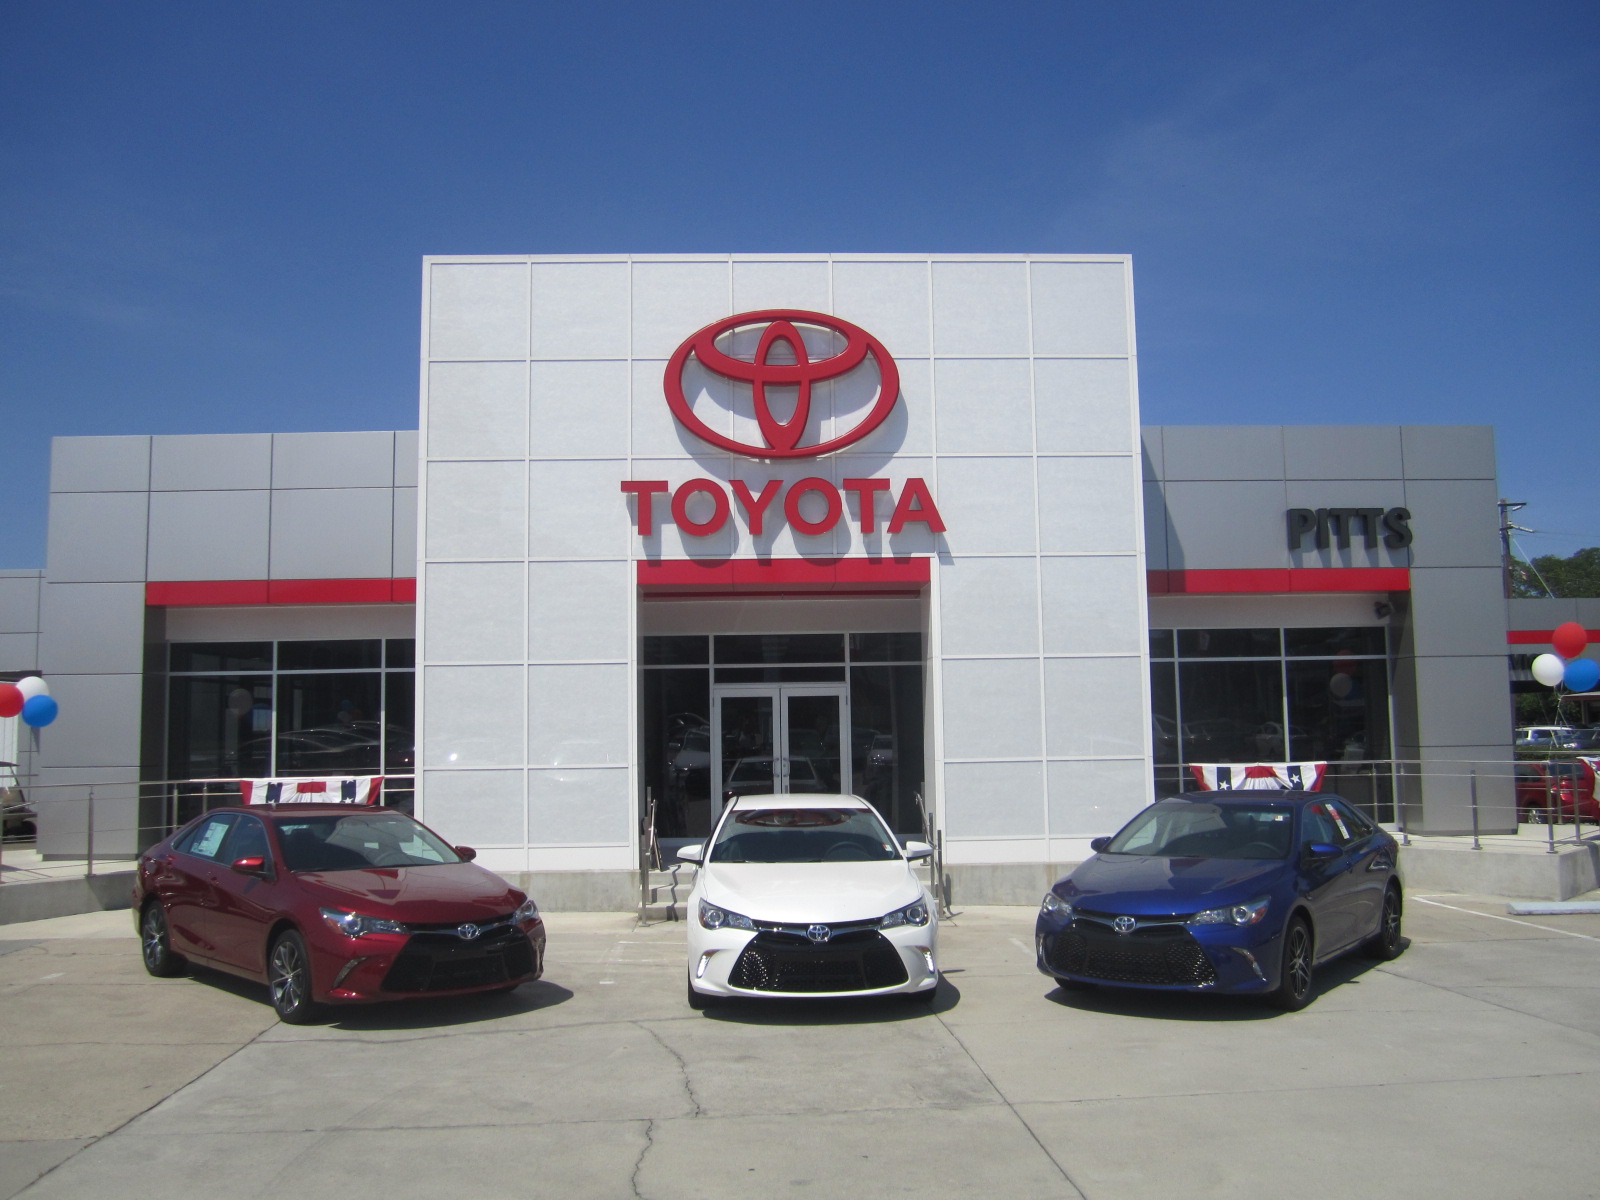 Pitts Toyota in Dublin GA 129 Cars Available Autotrader